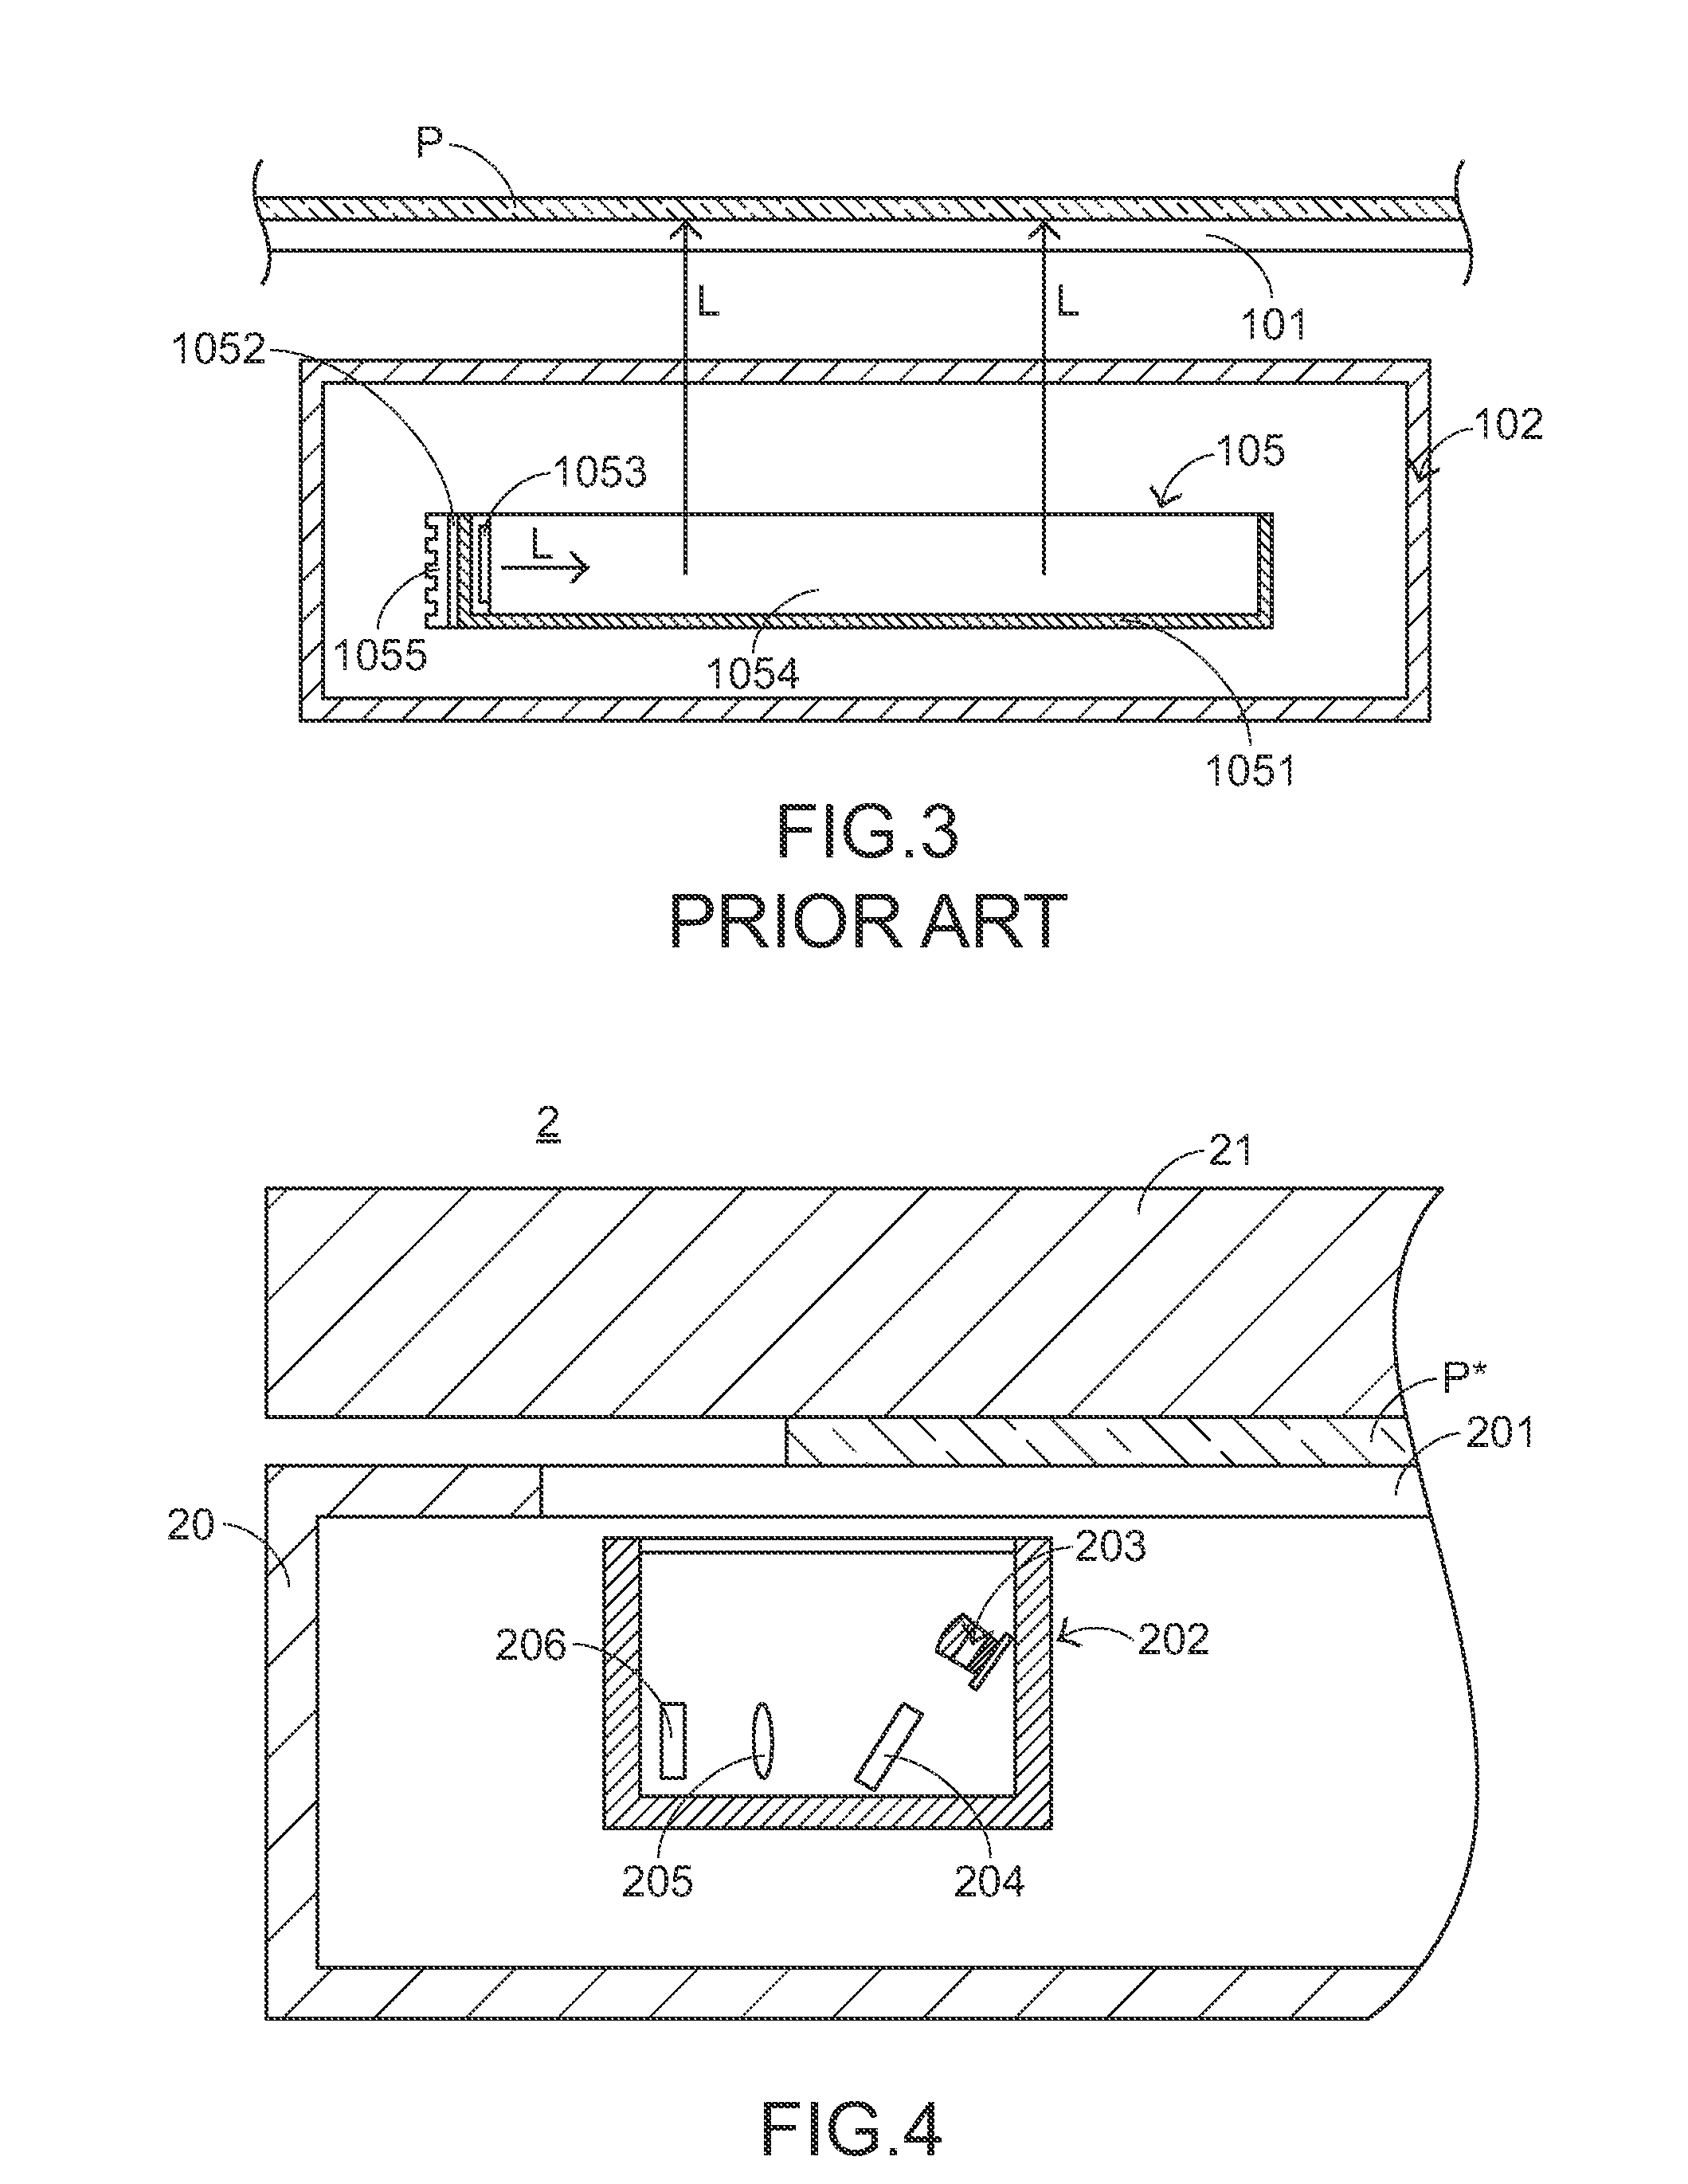 Light guide module of scanning apparatus